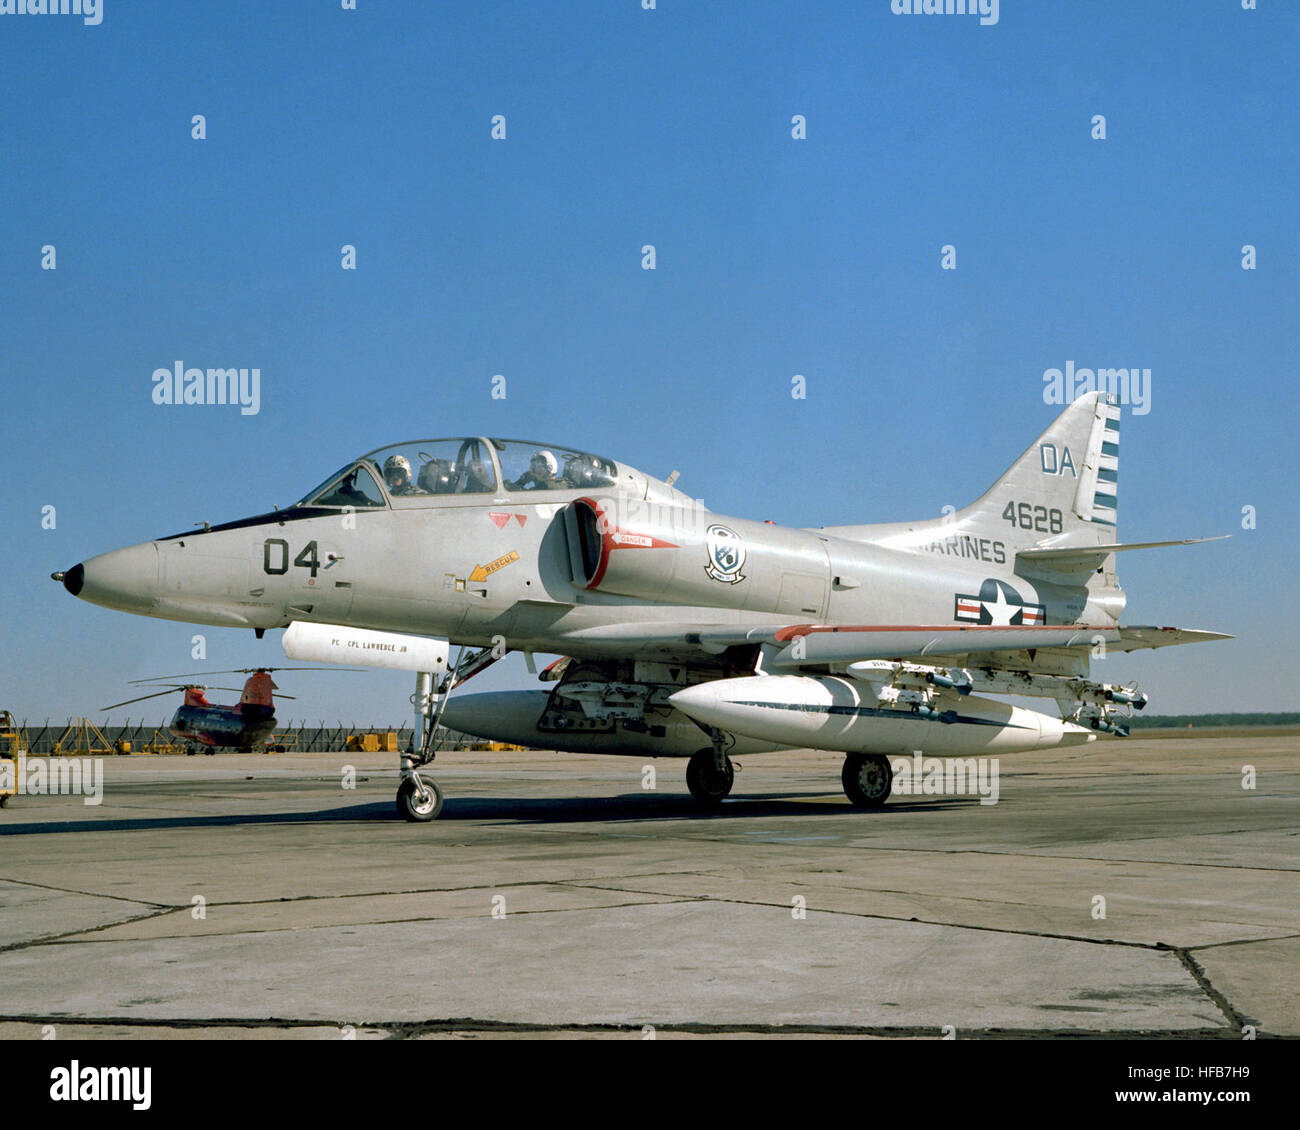 A left side view of a Marine TA-4F Skyhawk aircraft preparing to taxi from the flight line.  The TA-4F is from the Headquarters and Maintenance Squadron-32. DM-SC-82-07690 Stock Photo